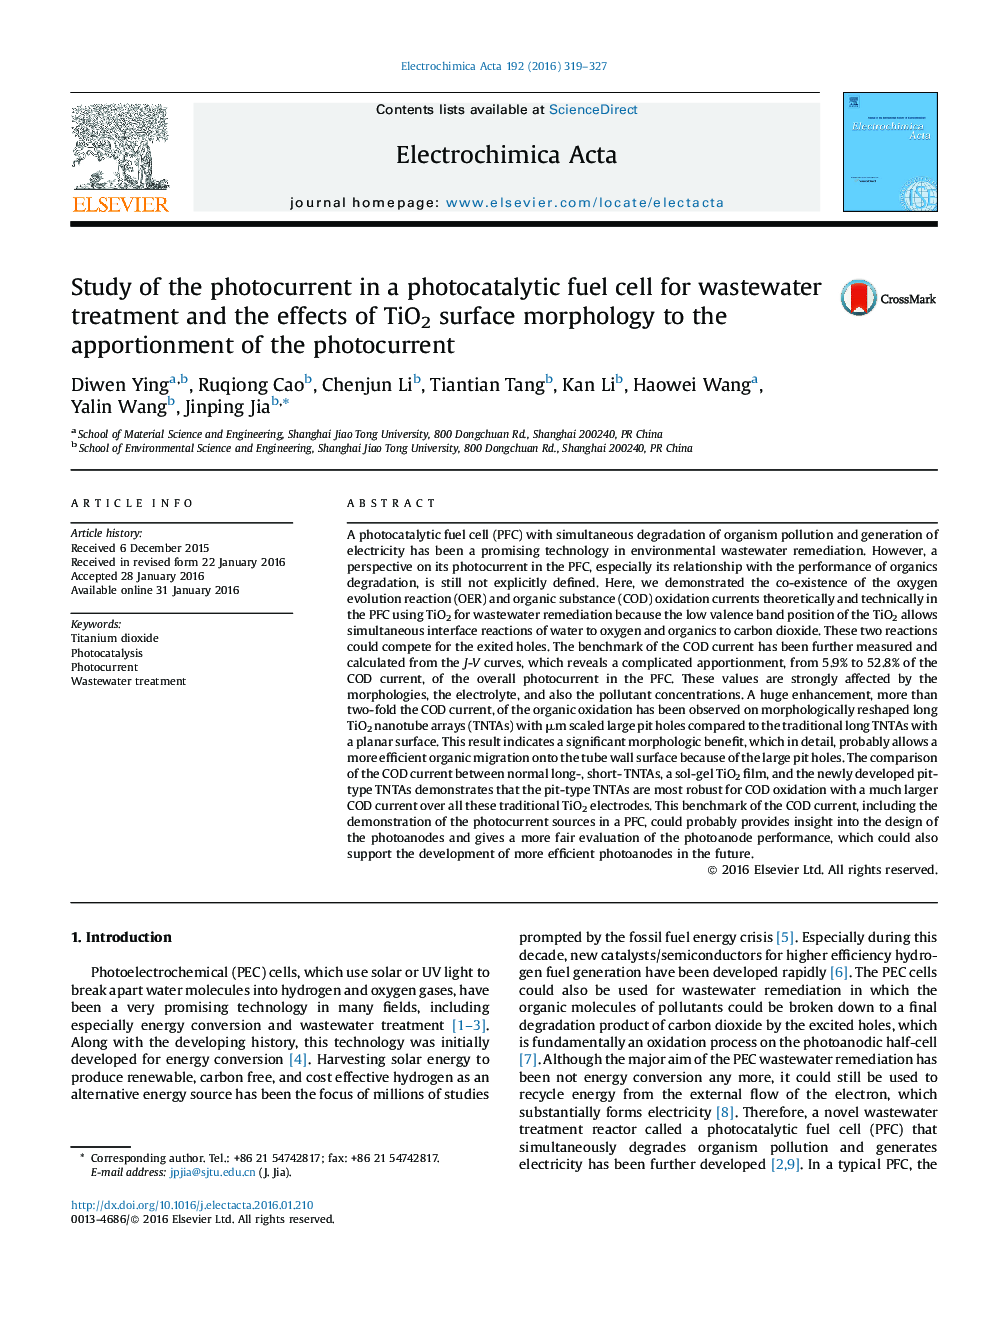 Study of the photocurrent in a photocatalytic fuel cell for wastewater treatment and the effects of TiO2 surface morphology to the apportionment of the photocurrent